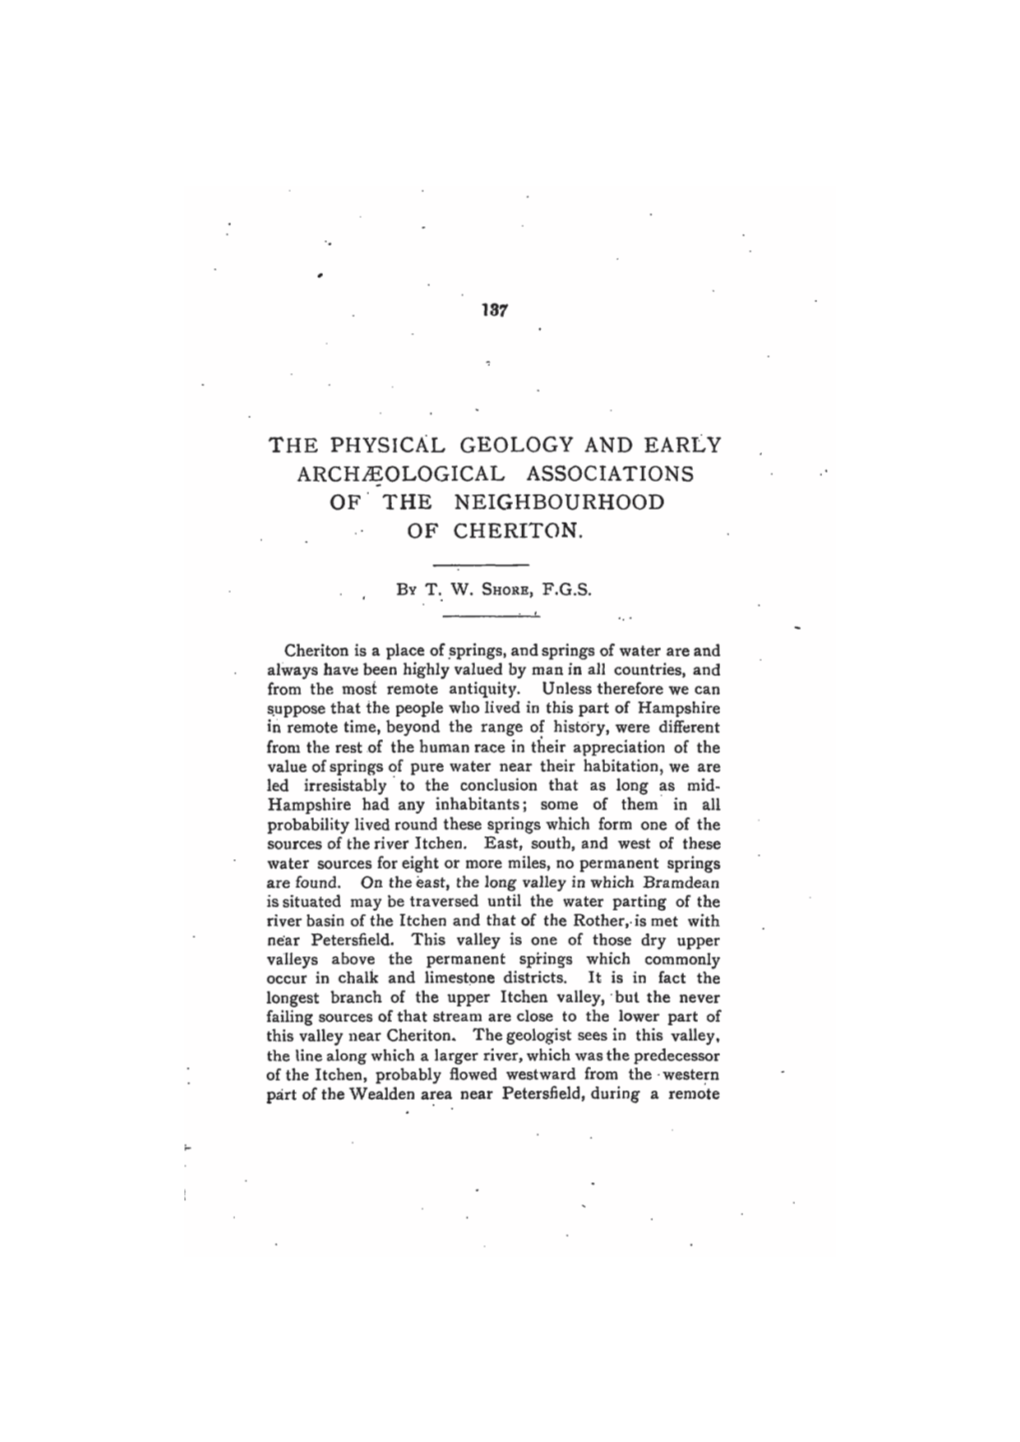 The Physical Geology and Early Archaeological Associations of the Neighbourhood of Cheriton